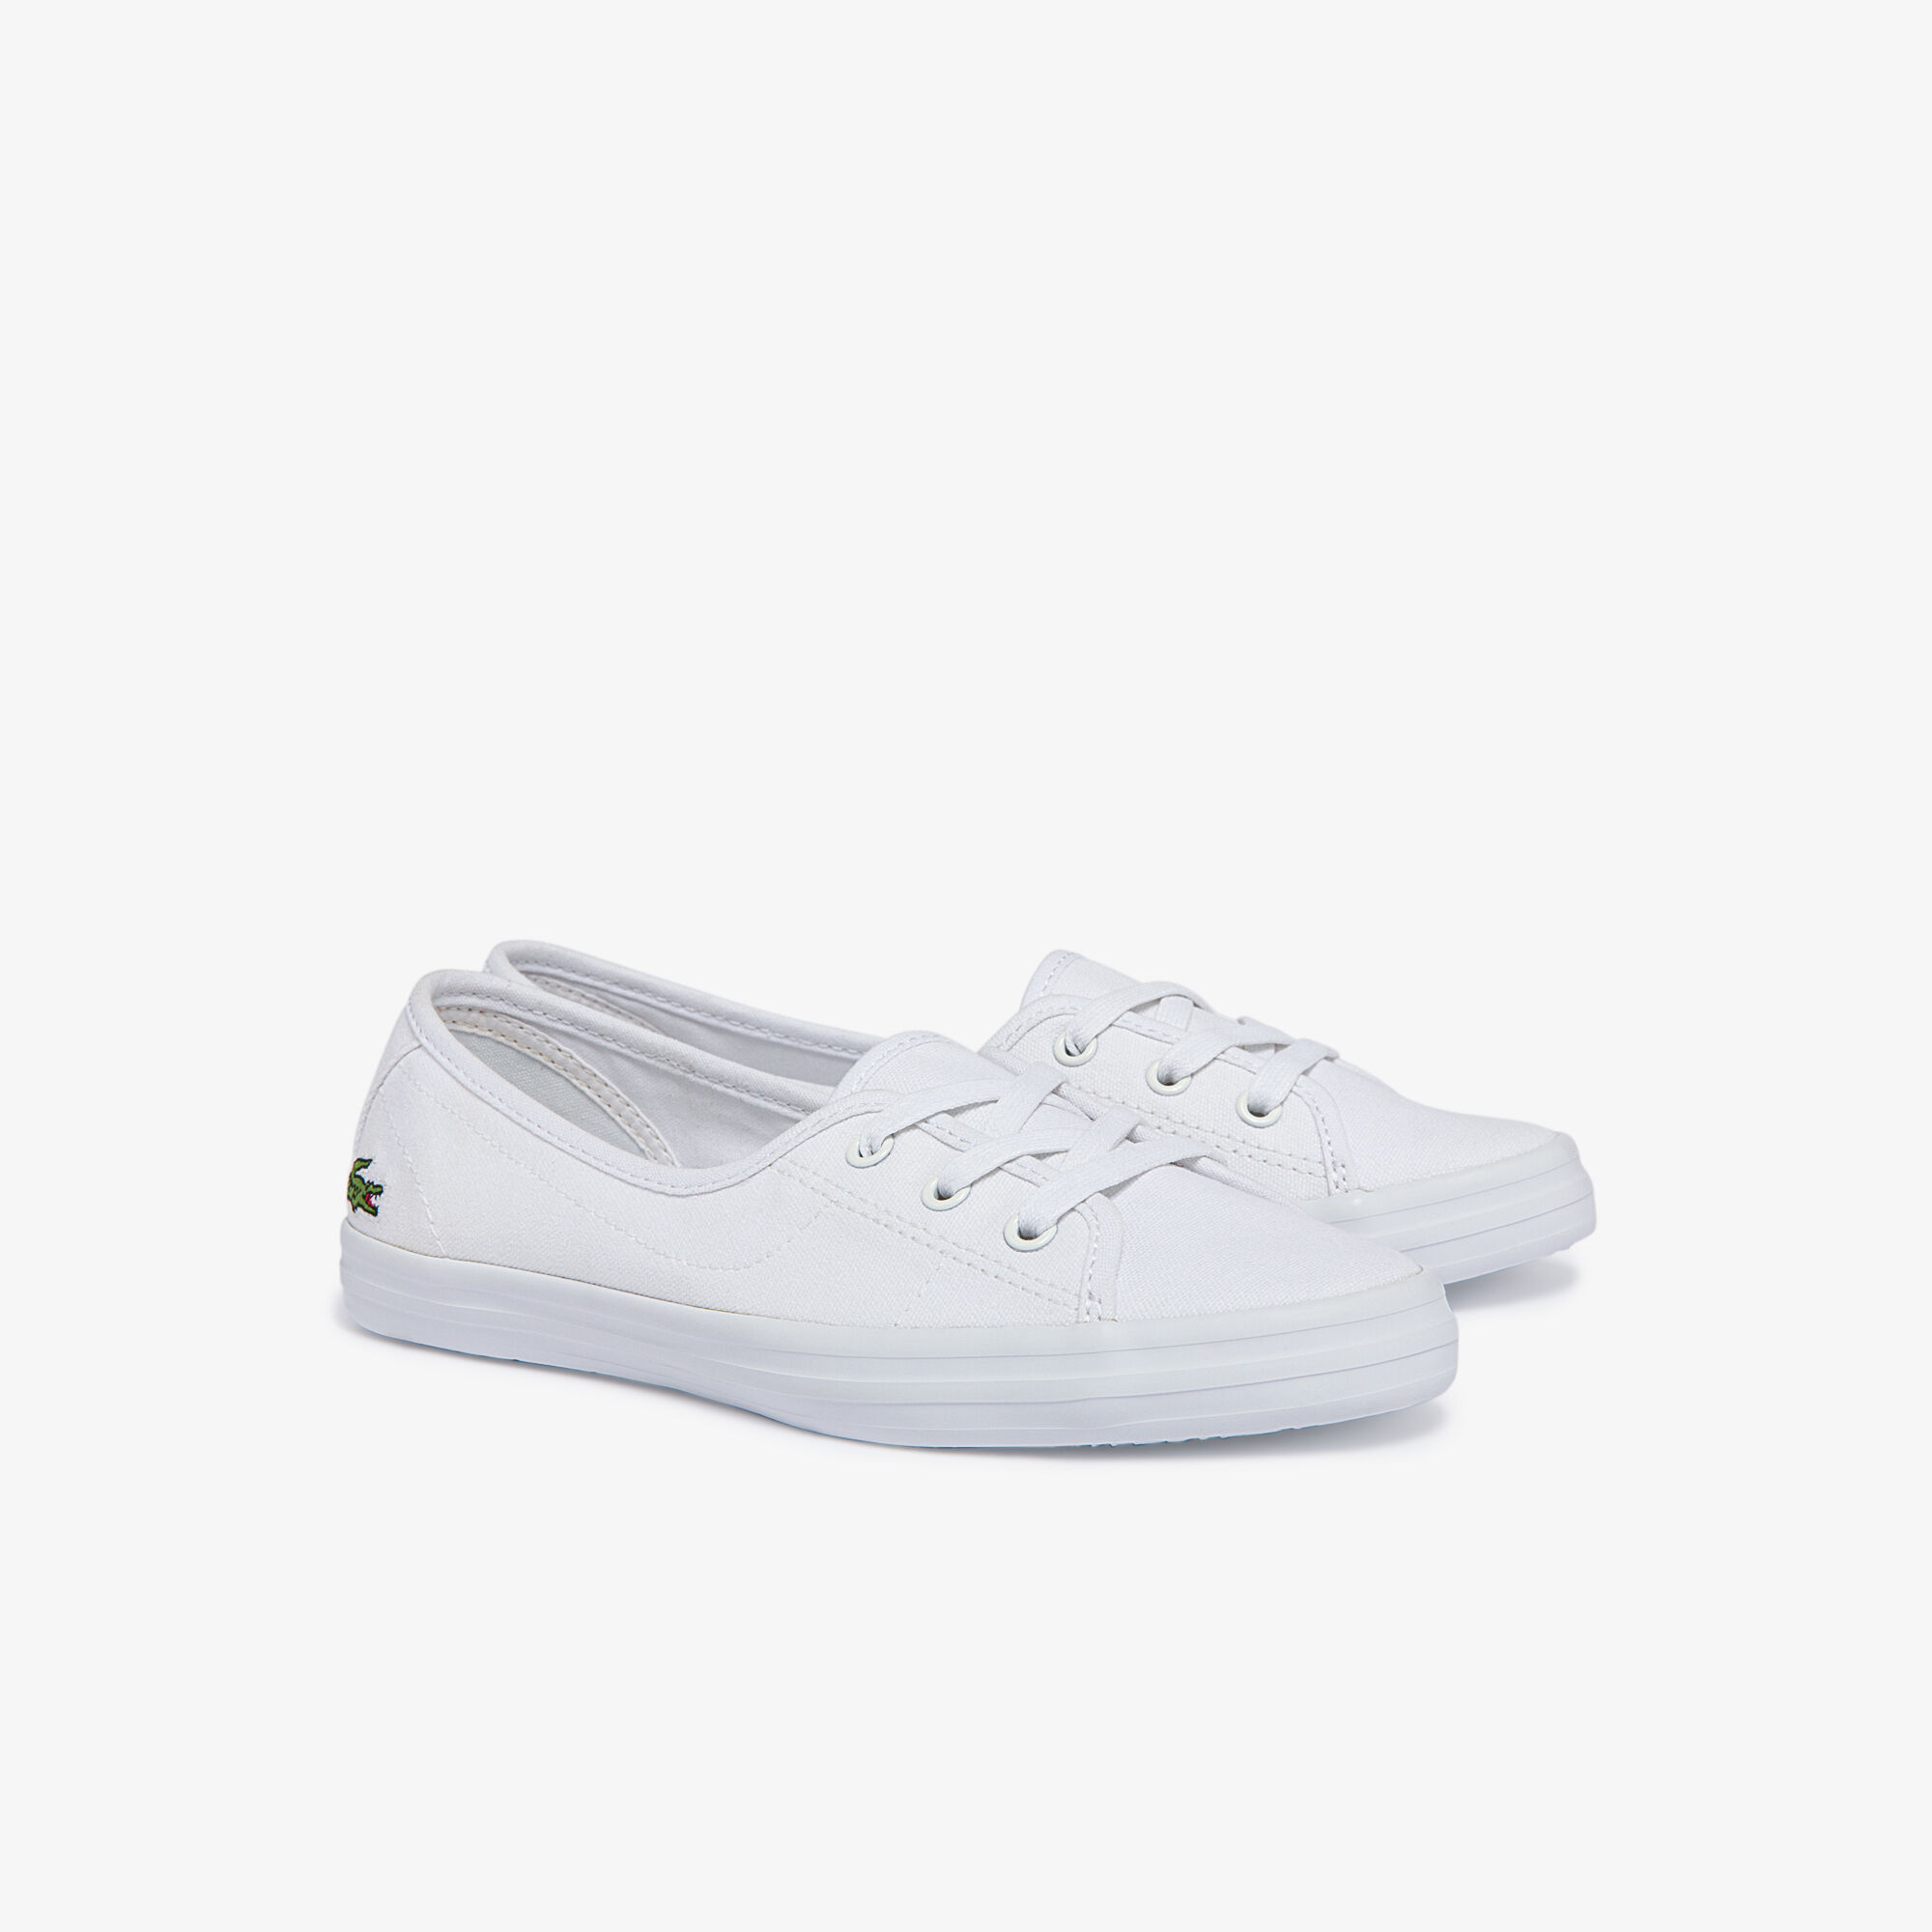 Women's Ziane Chunky Canvas Trainers